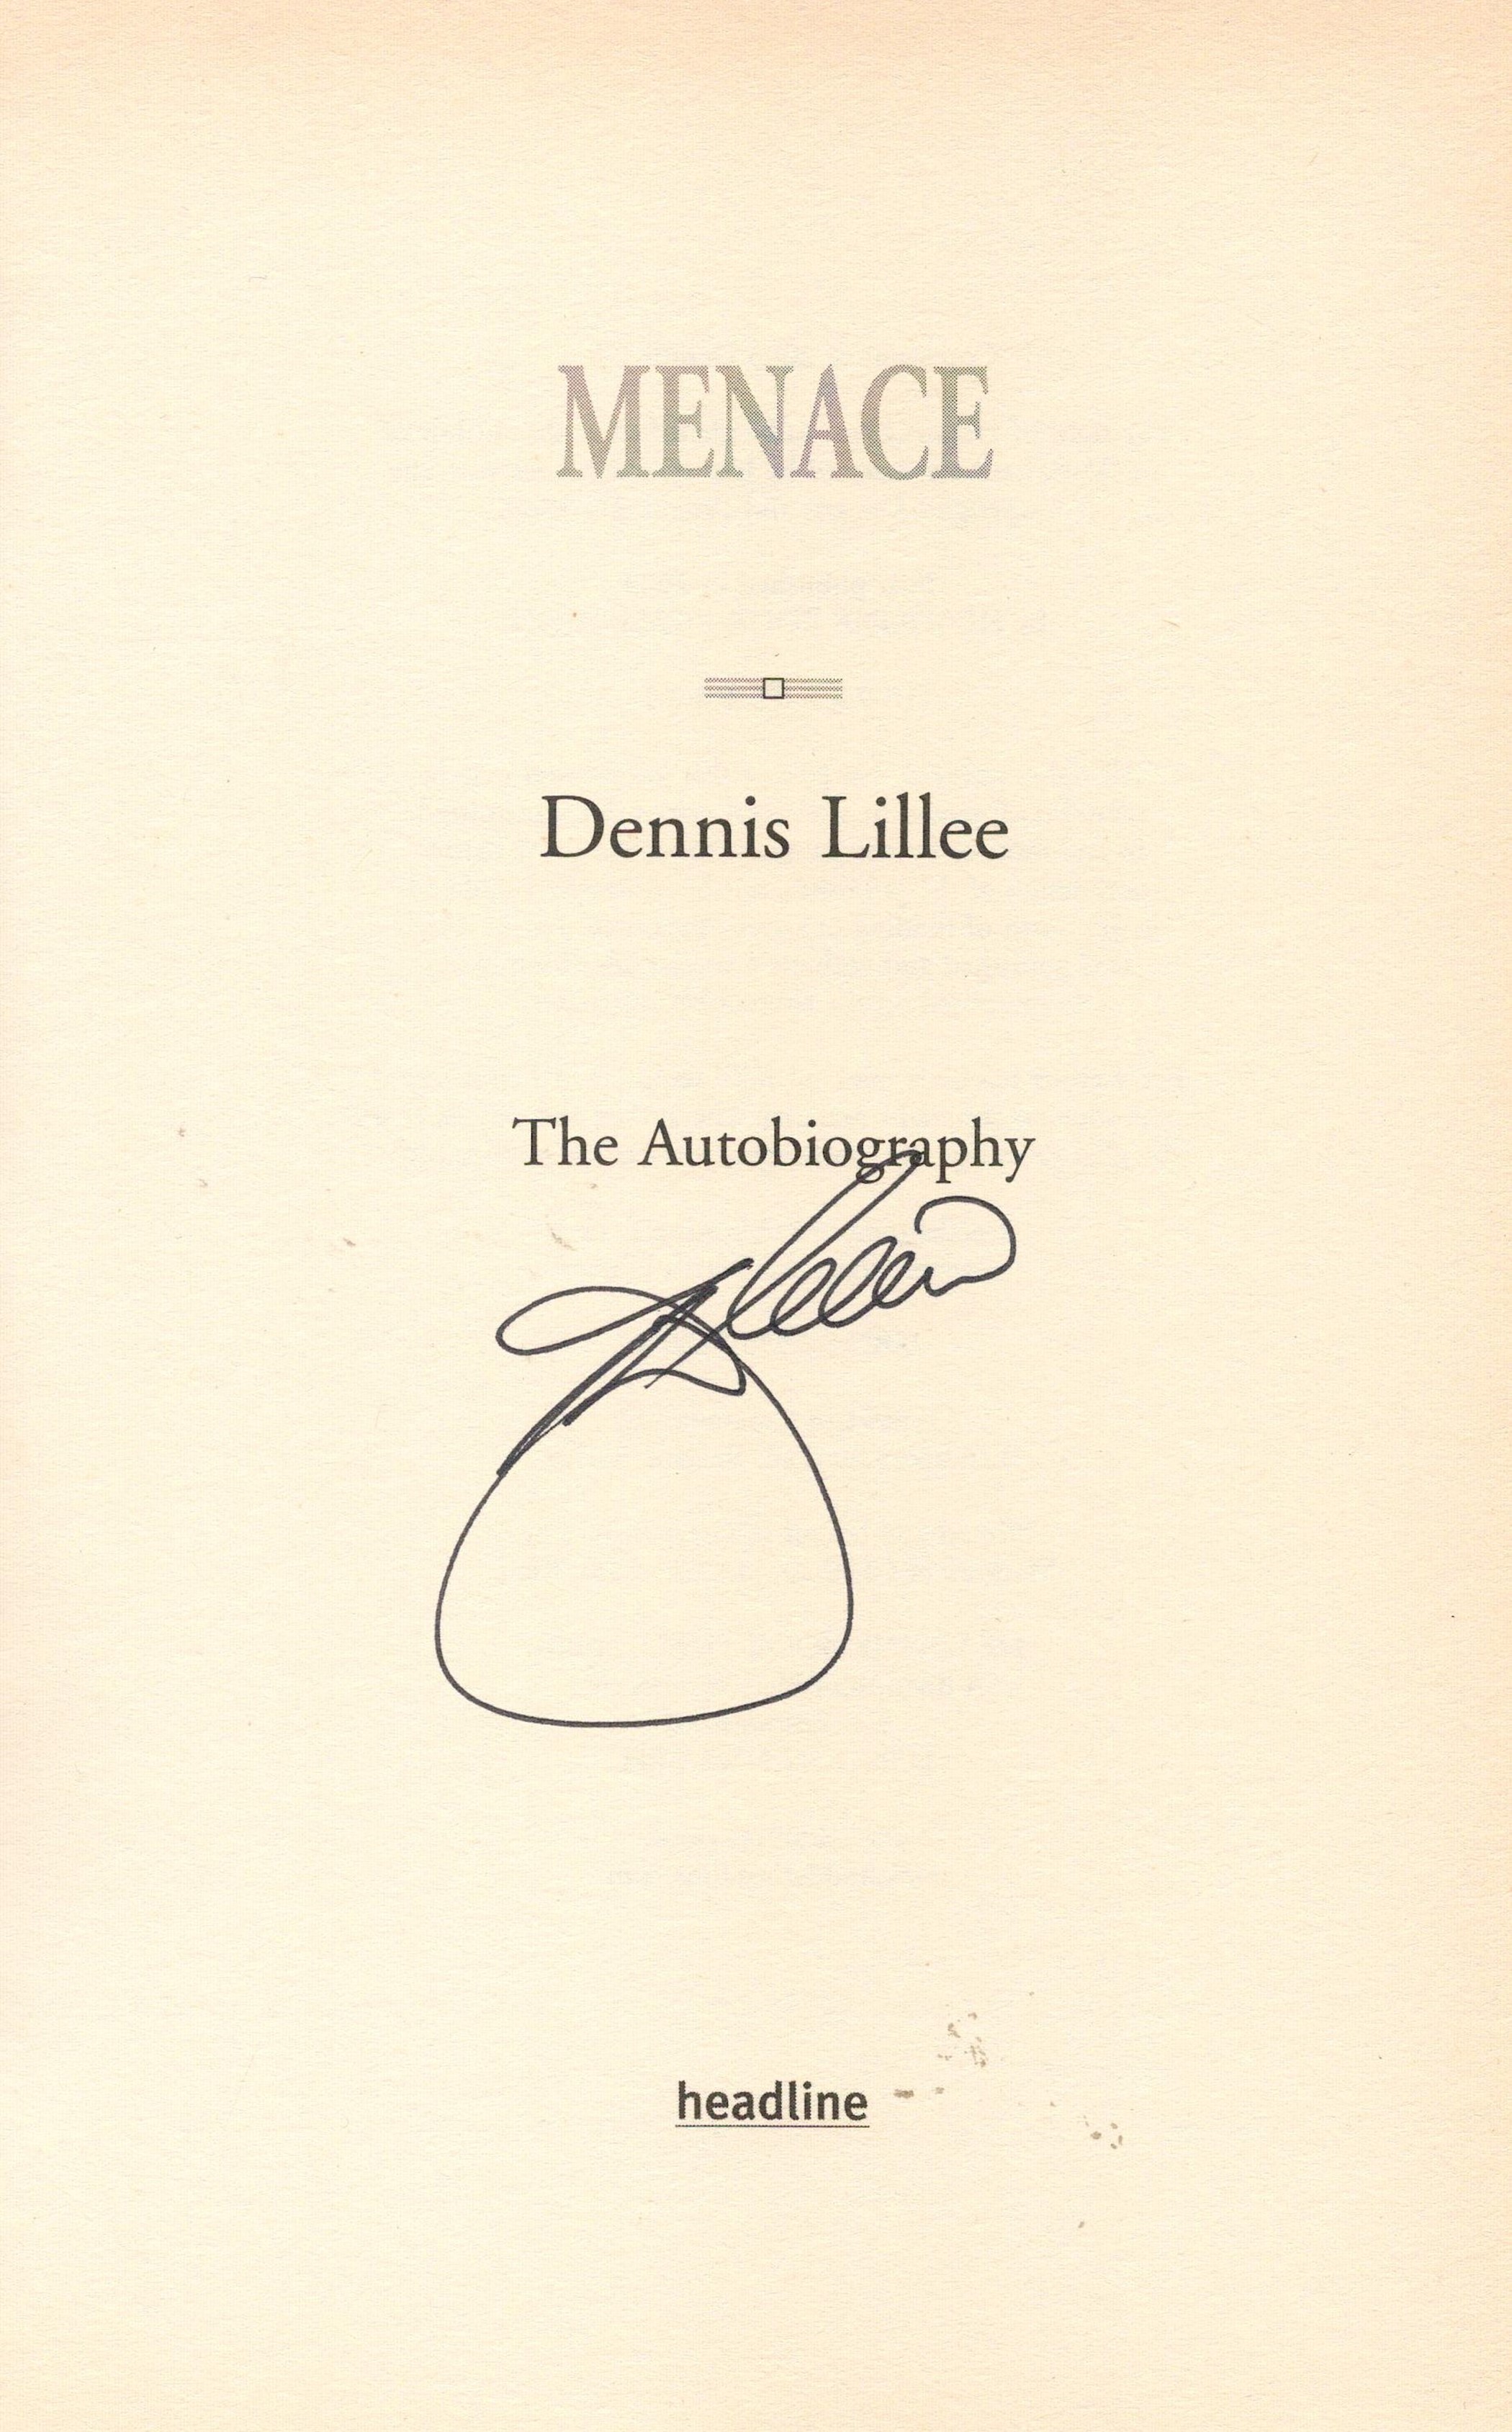 Signed Book Dennis Lillee The Autobiography Menace First Edition 2003 Hardback Book Signed by Dennis - Image 2 of 4